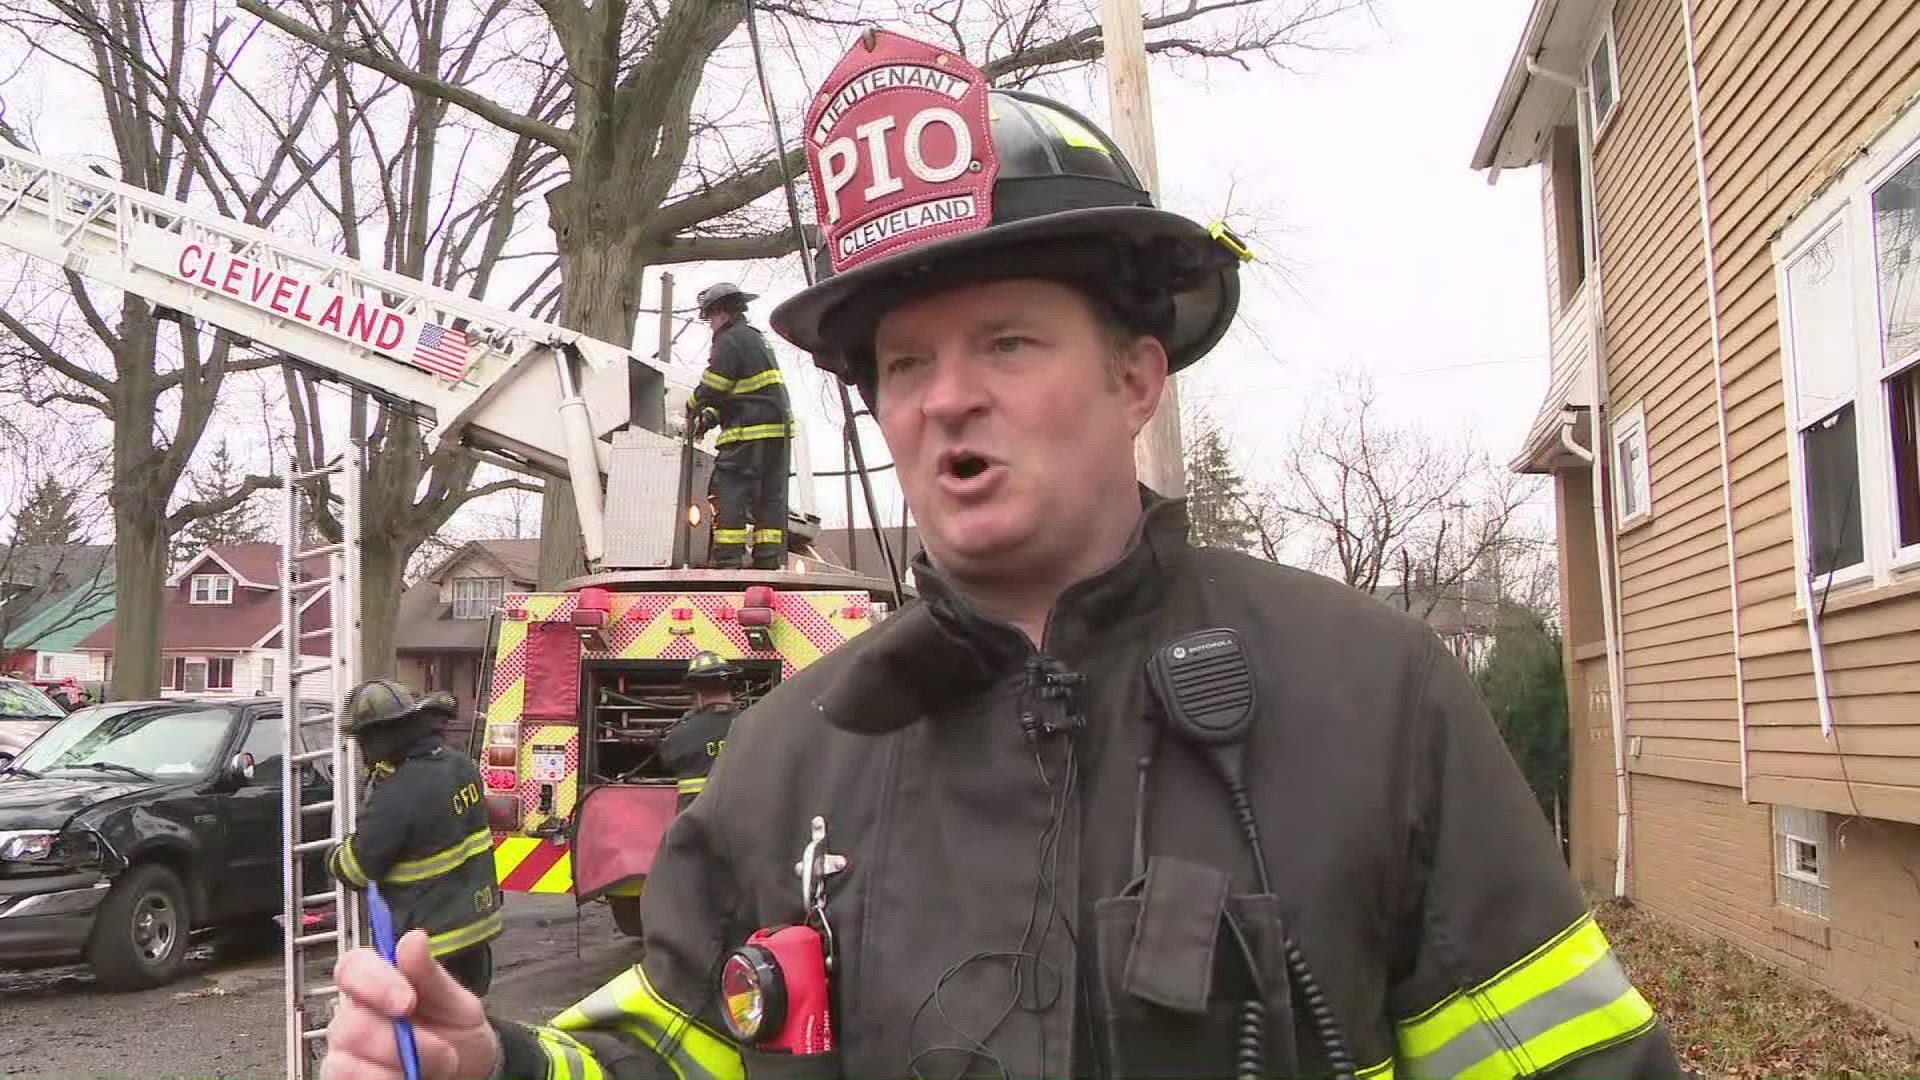 A fire claimed the life of a dog on E. 113th Street in Cleveland. Lt. Mike Norman says the home's other occupants escaped safely.